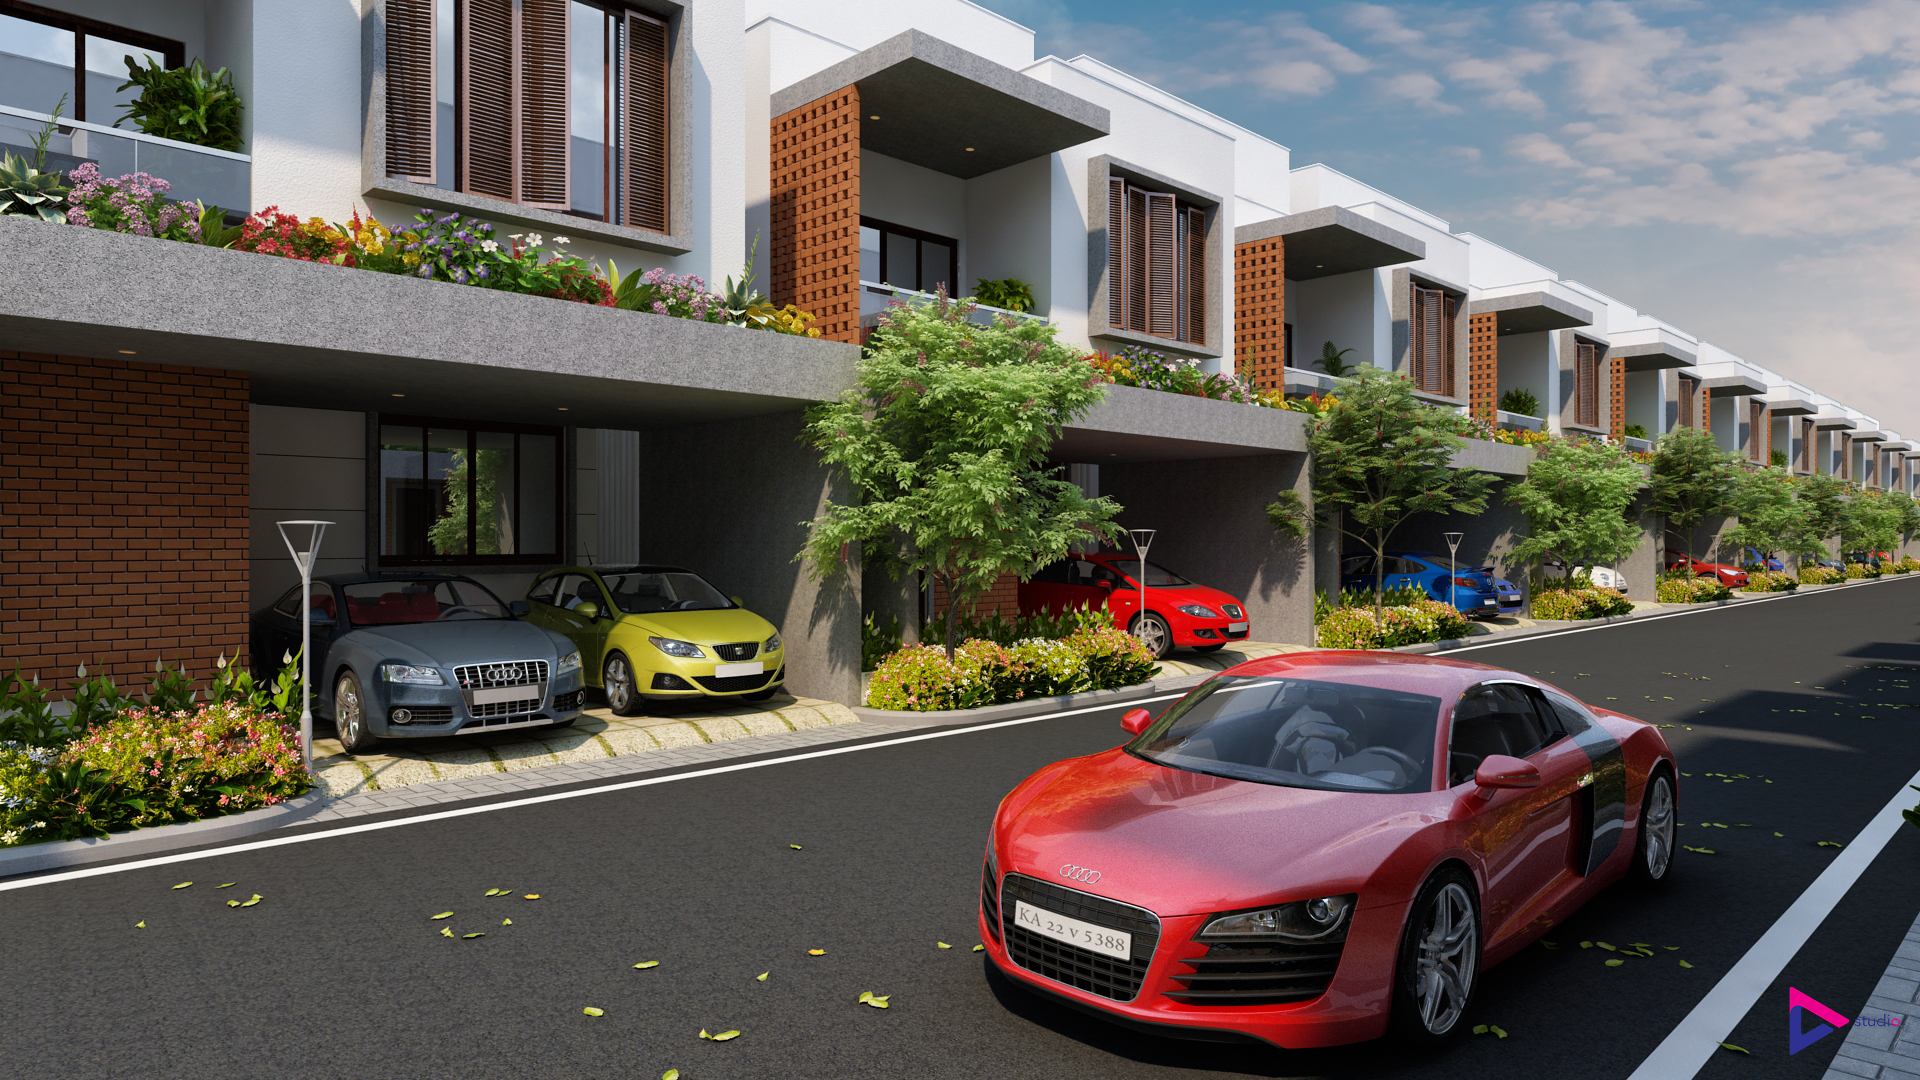 2 bhk Villas for sale in bangalore 